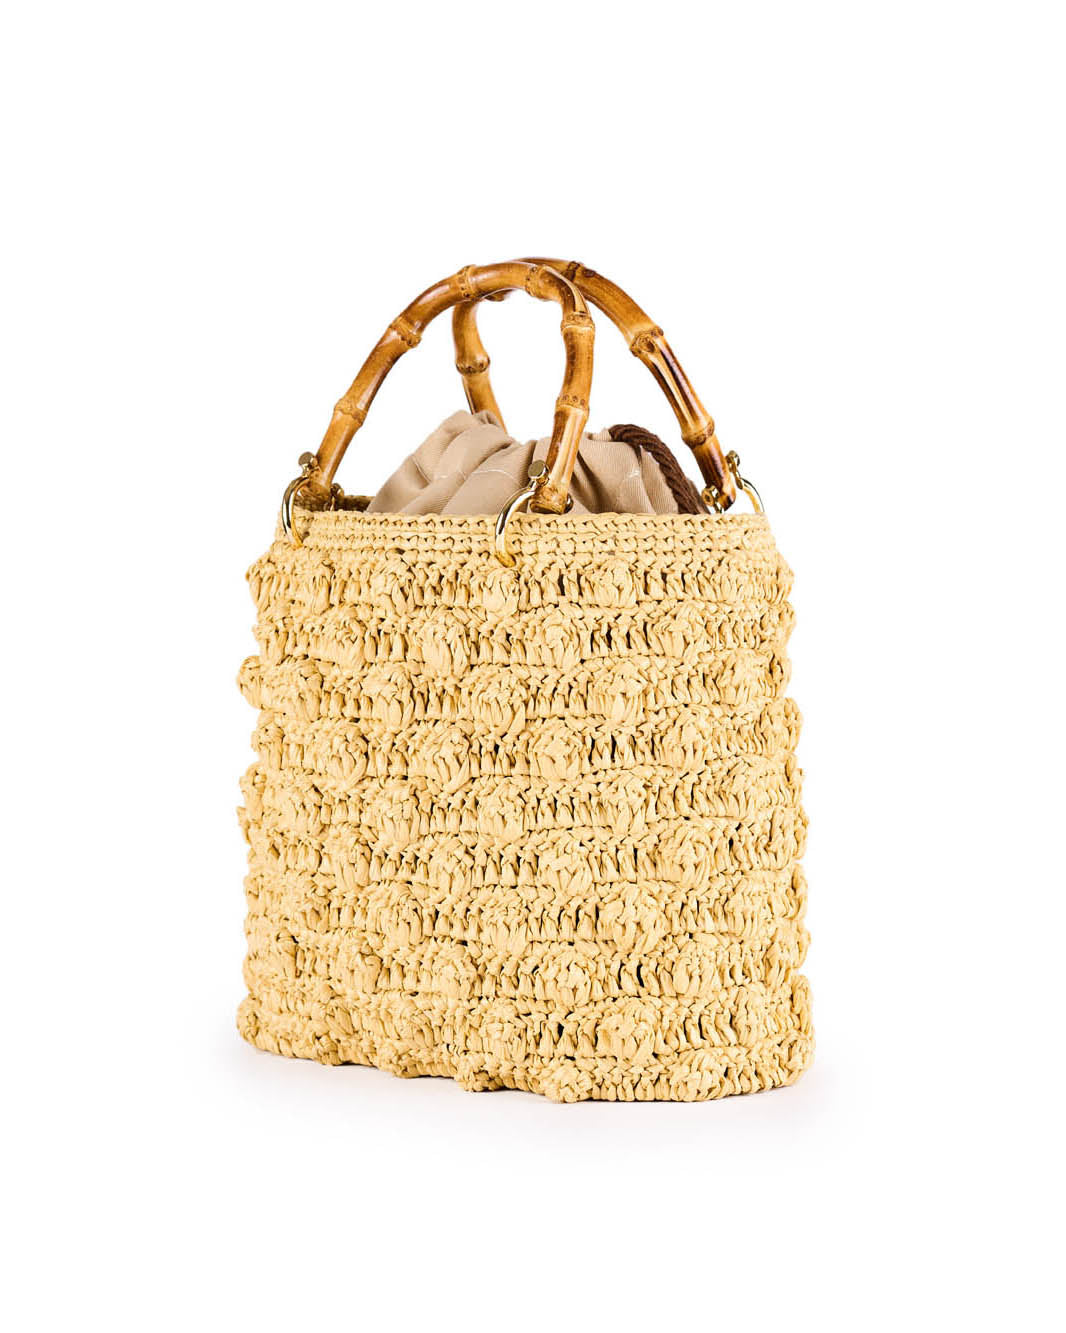 Handwoven straw tote bag with bamboo handles and beige interior lining